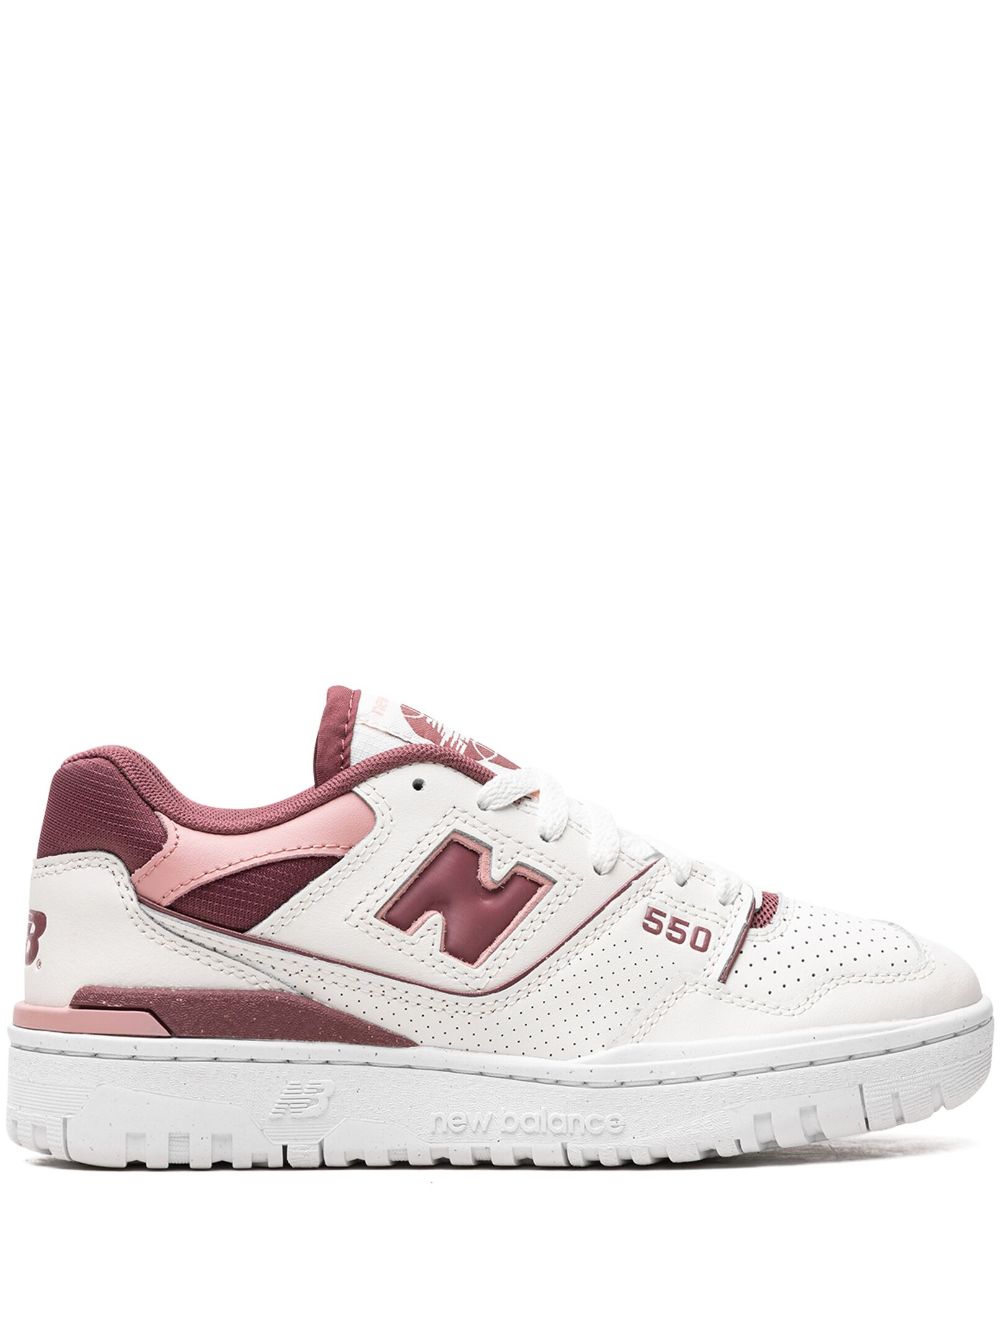 New Balance 550 "Red Rouge" sneakers - White von New Balance